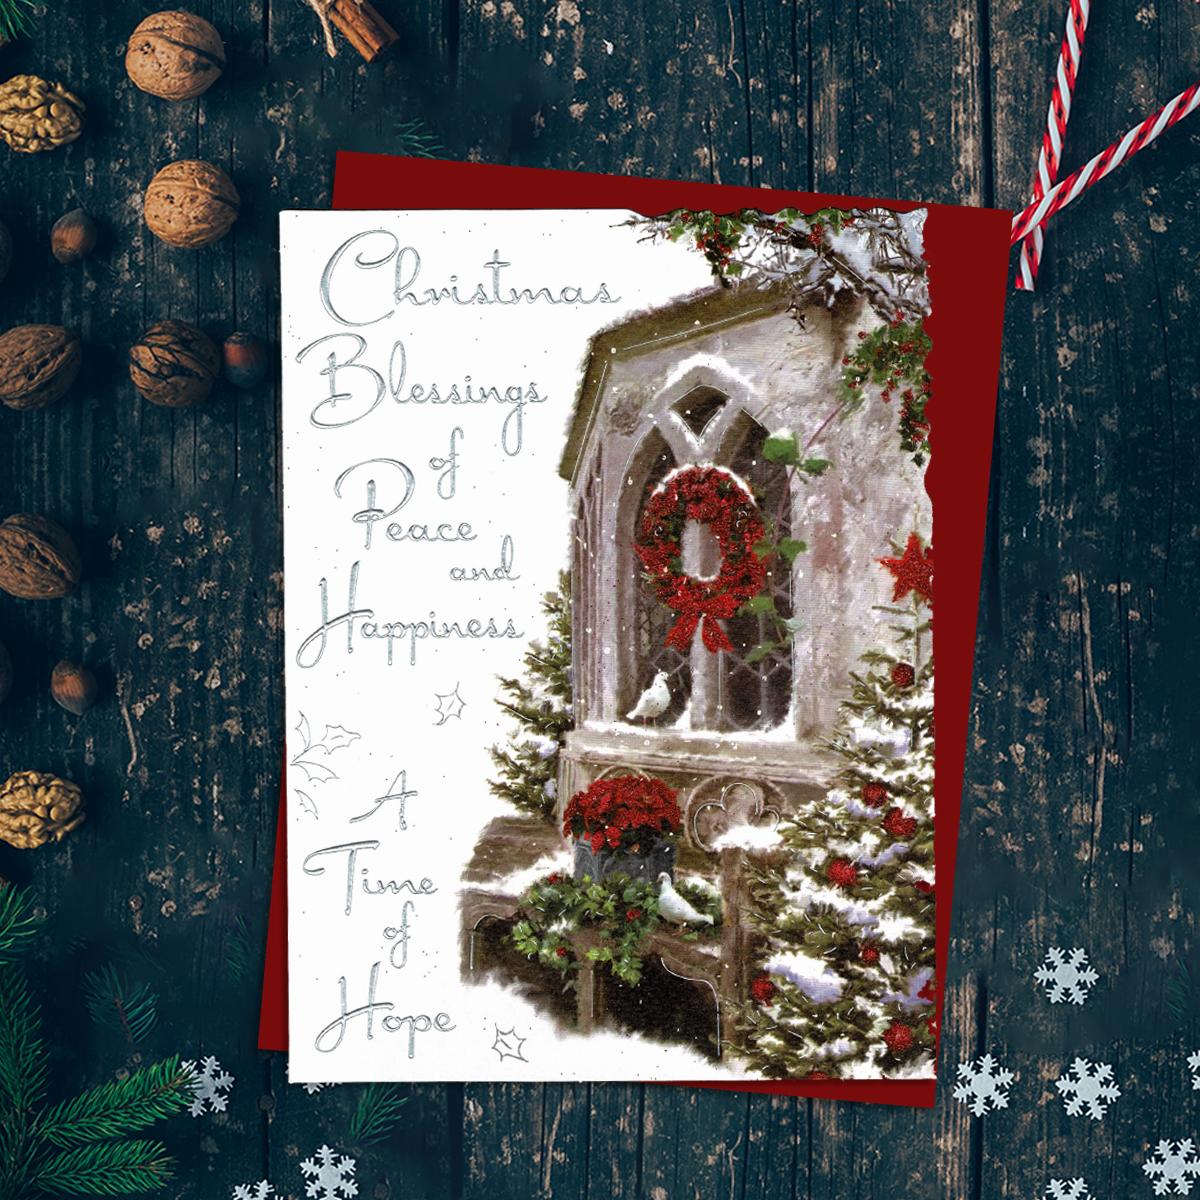 Christmas Blessings Of Peace And Happiness A Time Of Hope Featuring A Decorated Church Window With Christmas Wreath And Doves. Finished With Silver foil Detail And Added Sparkle